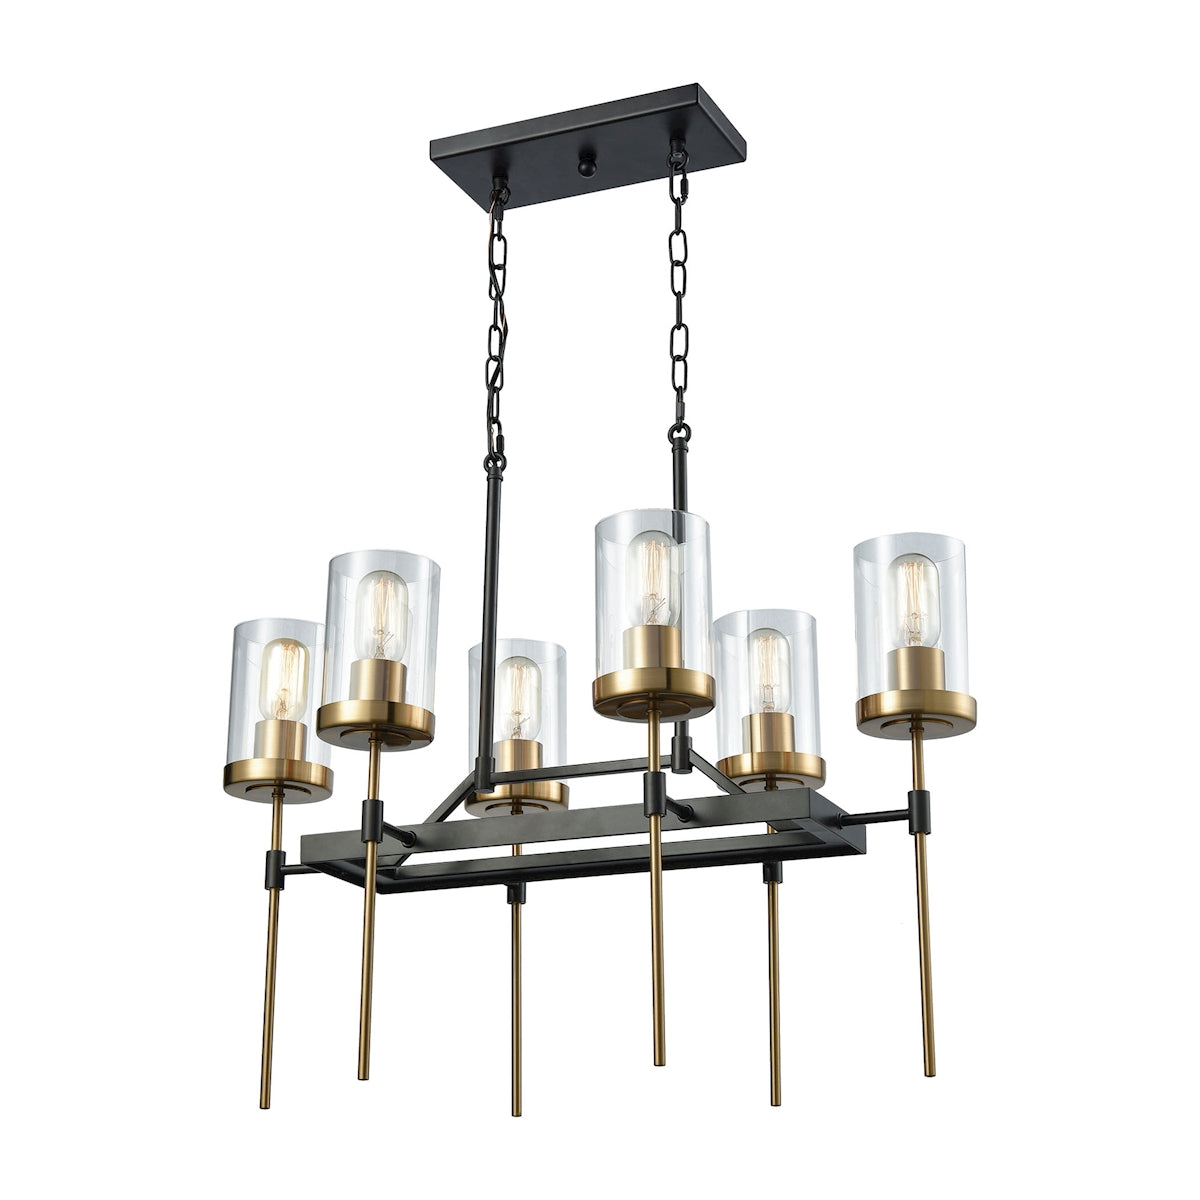 ELK Lighting 14551/6 North Haven 6-Light Chandelier in Oil Rubbed Bronze and Satin Brass with Clear Glass